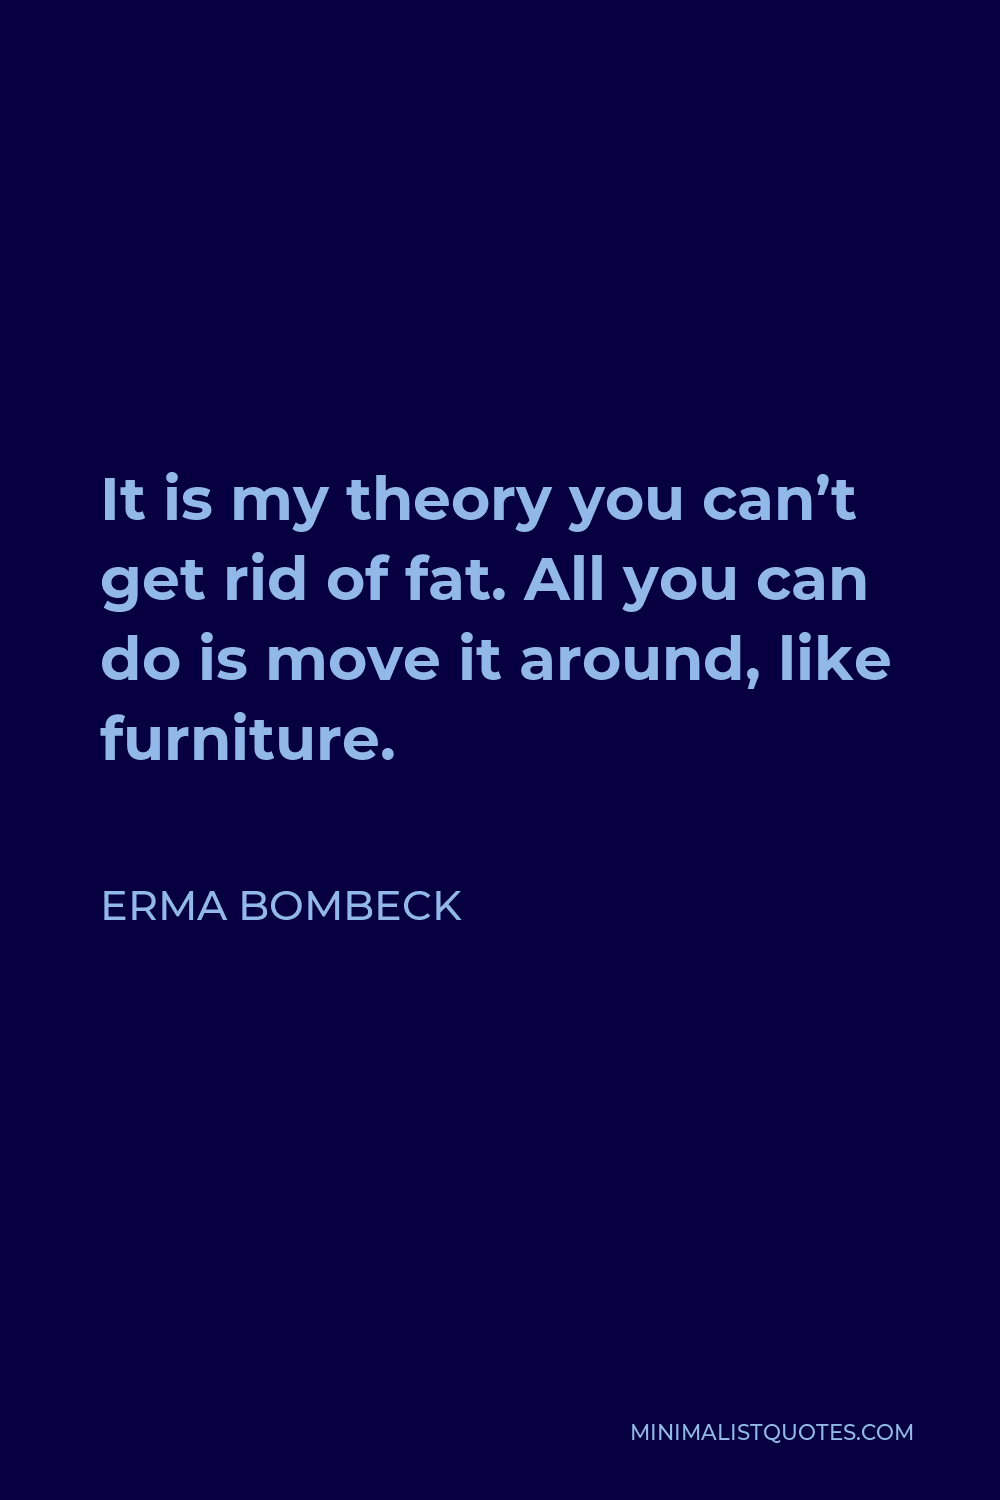 Erma Bombeck Quote - It is my theory you can’t get rid of fat. All you can do is move it around, like furniture.